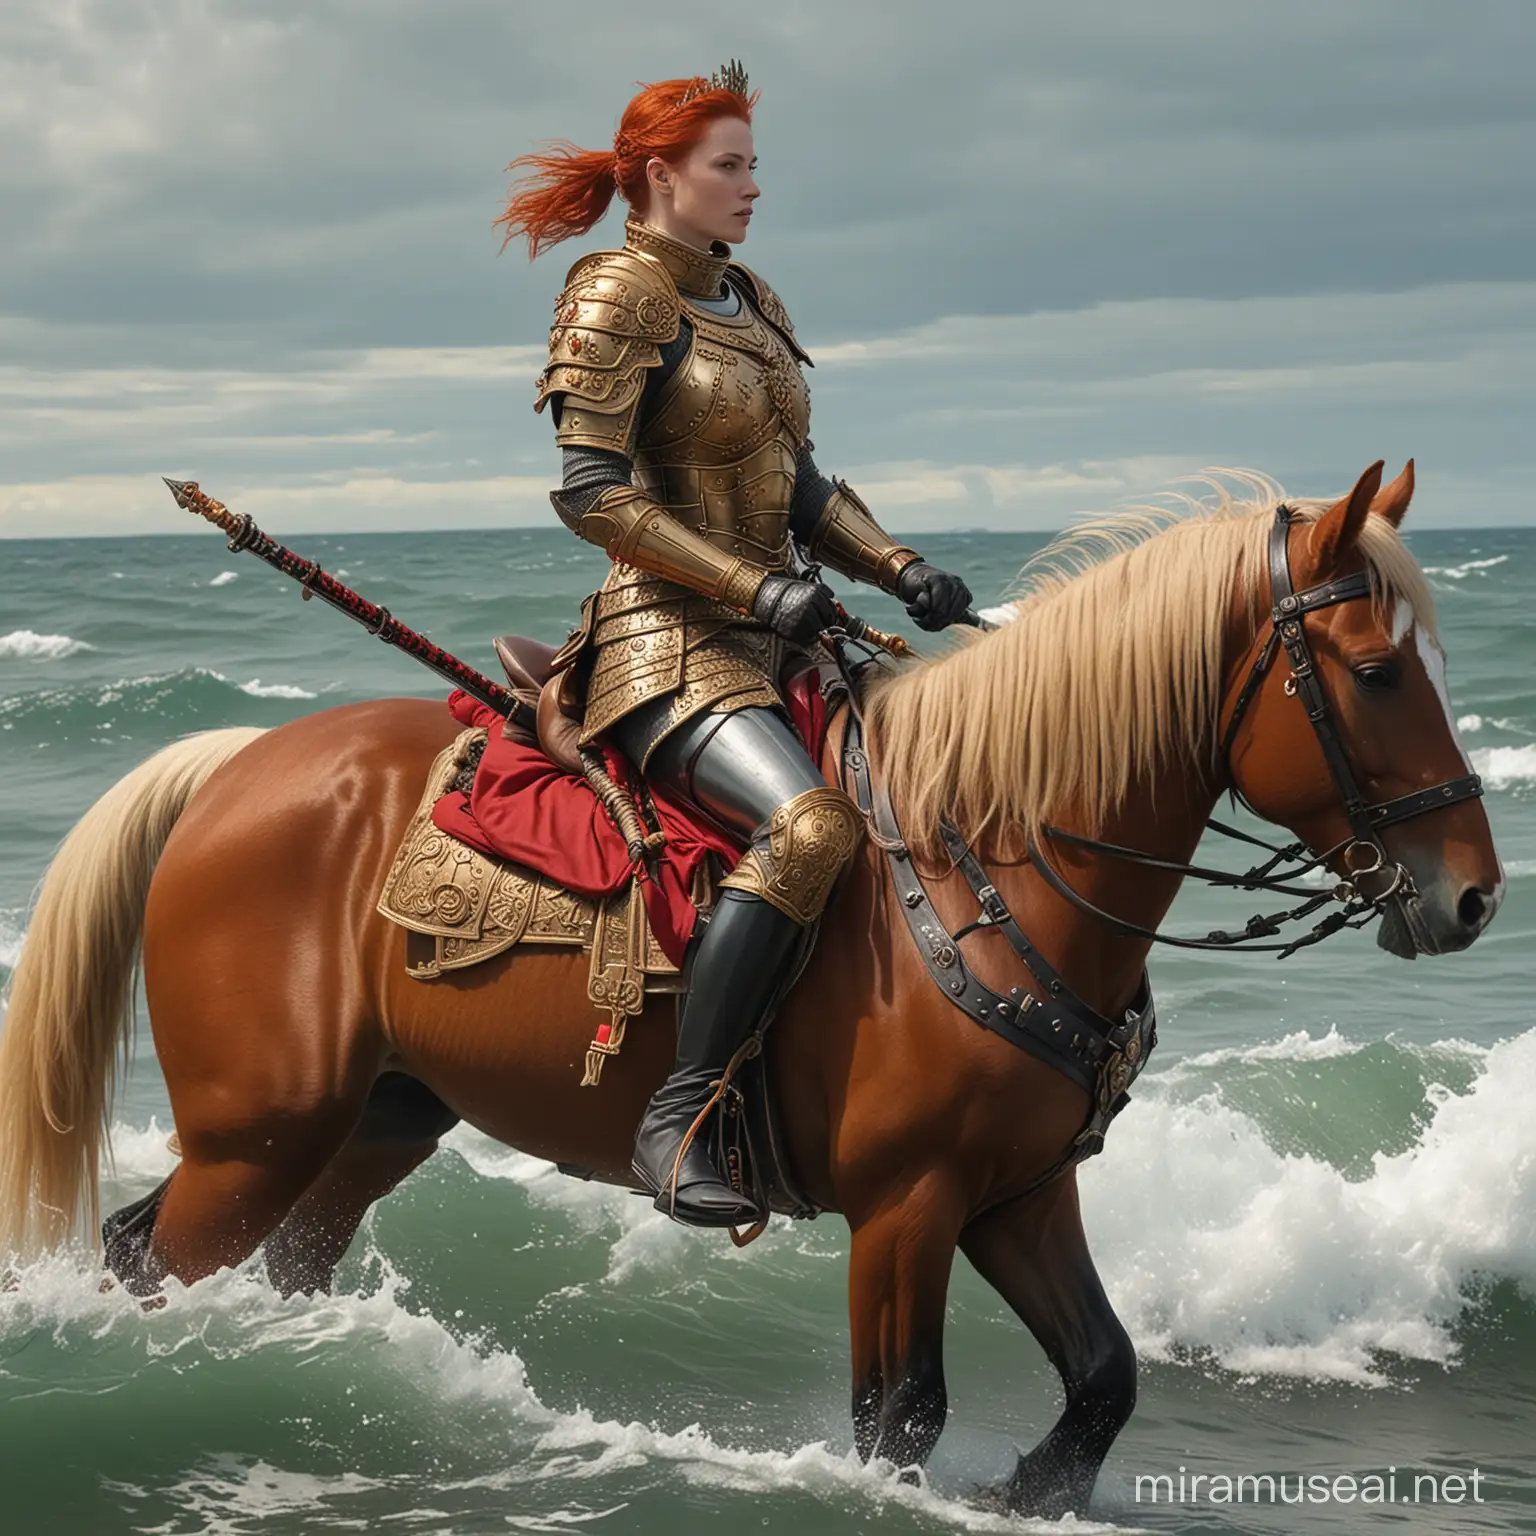 RedCrowned Queen on Horseback Oversees Pilots at Sea